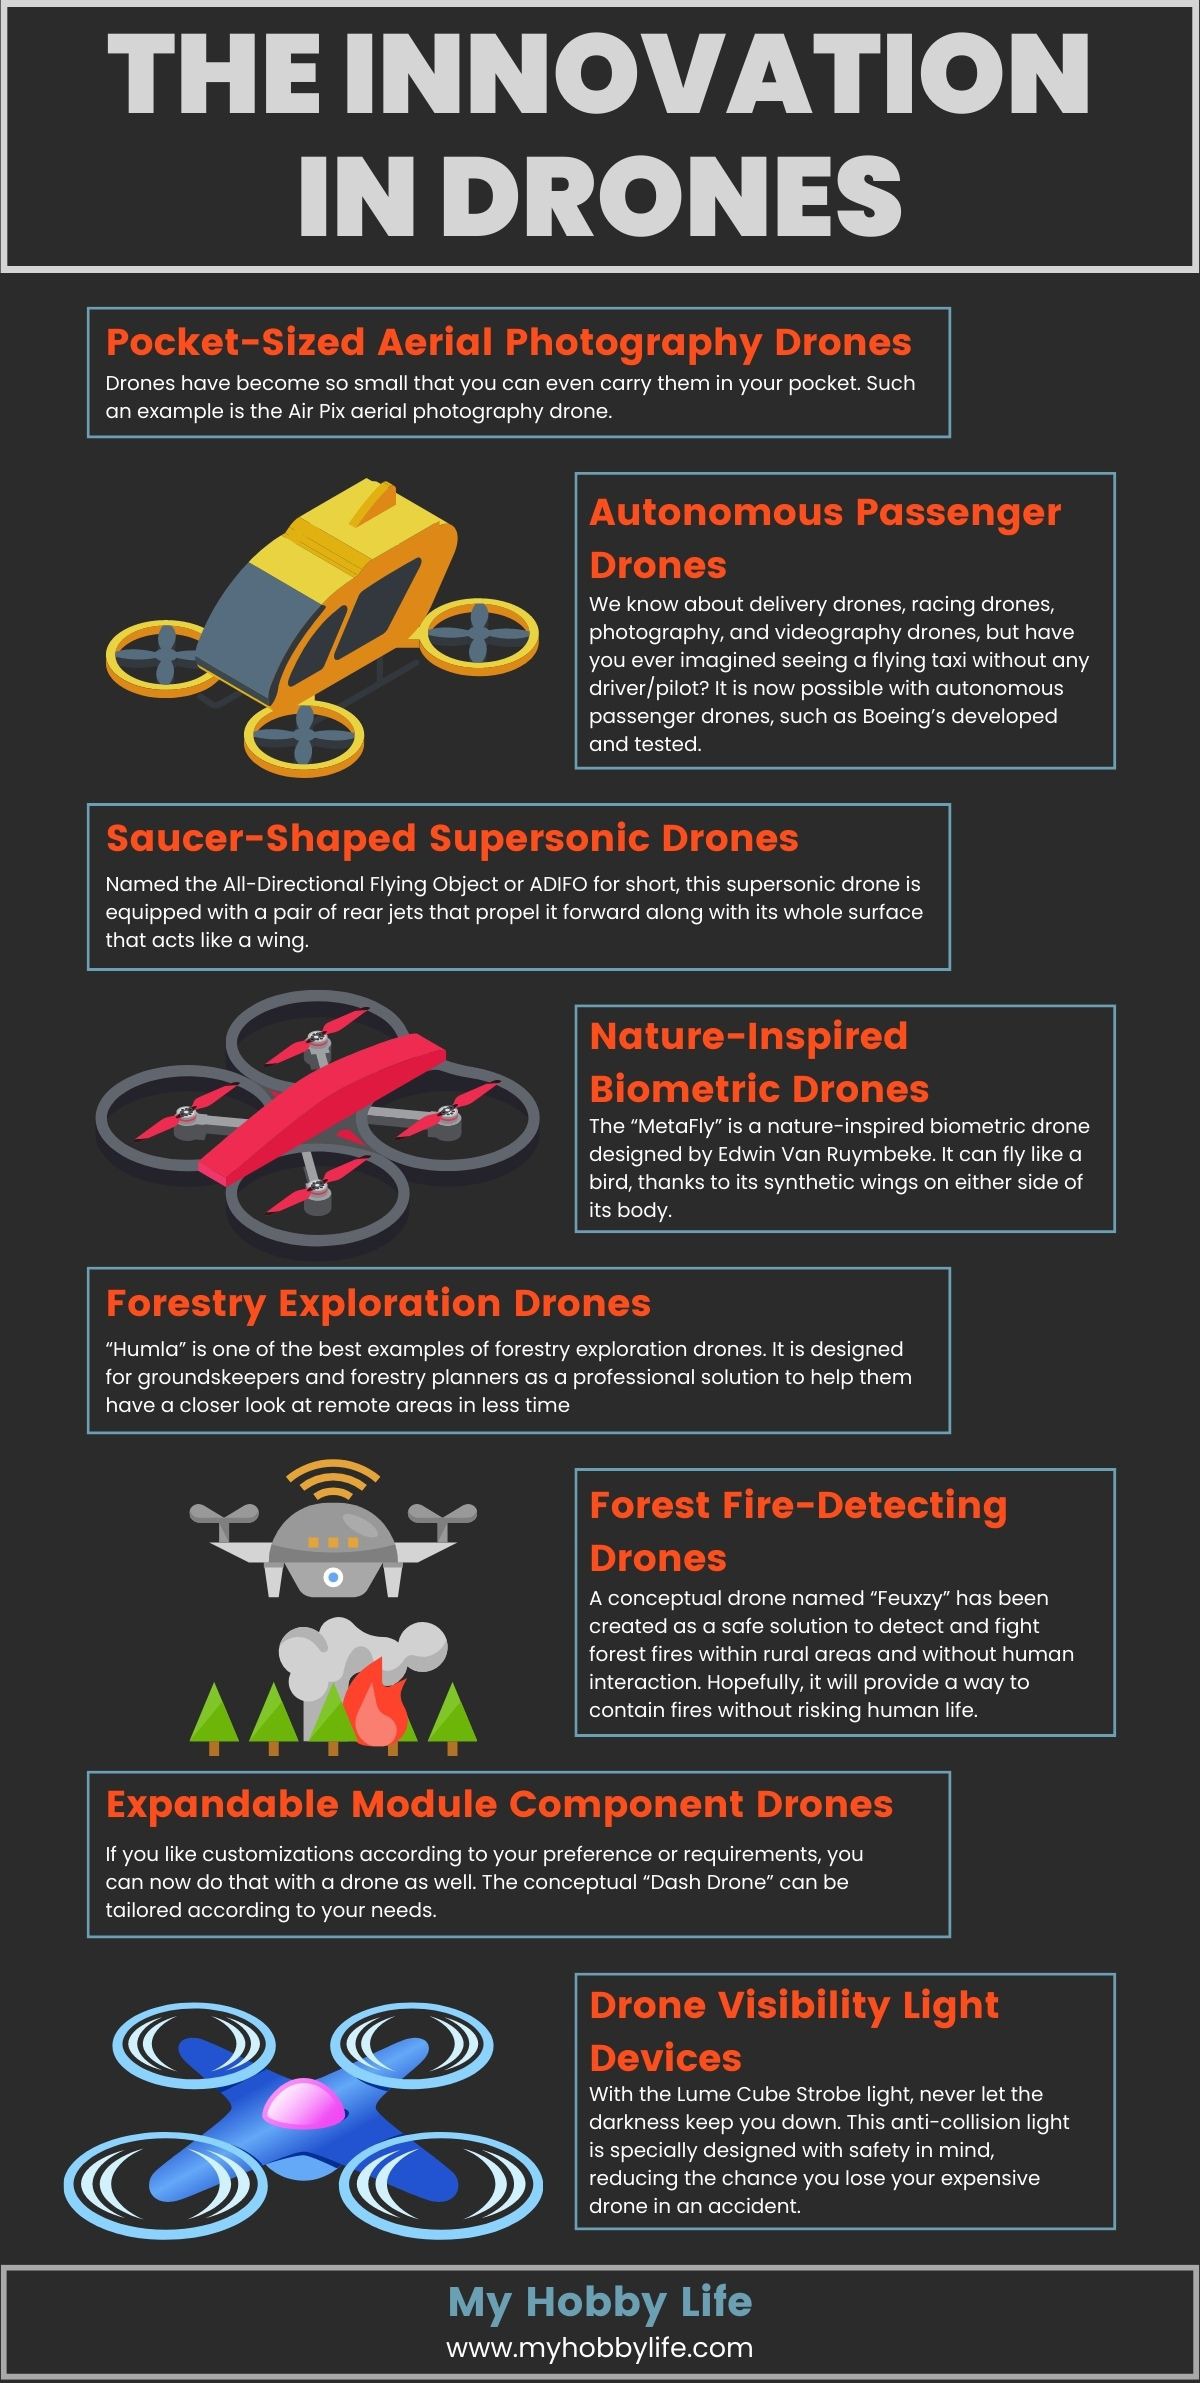 The Innovation in Drones